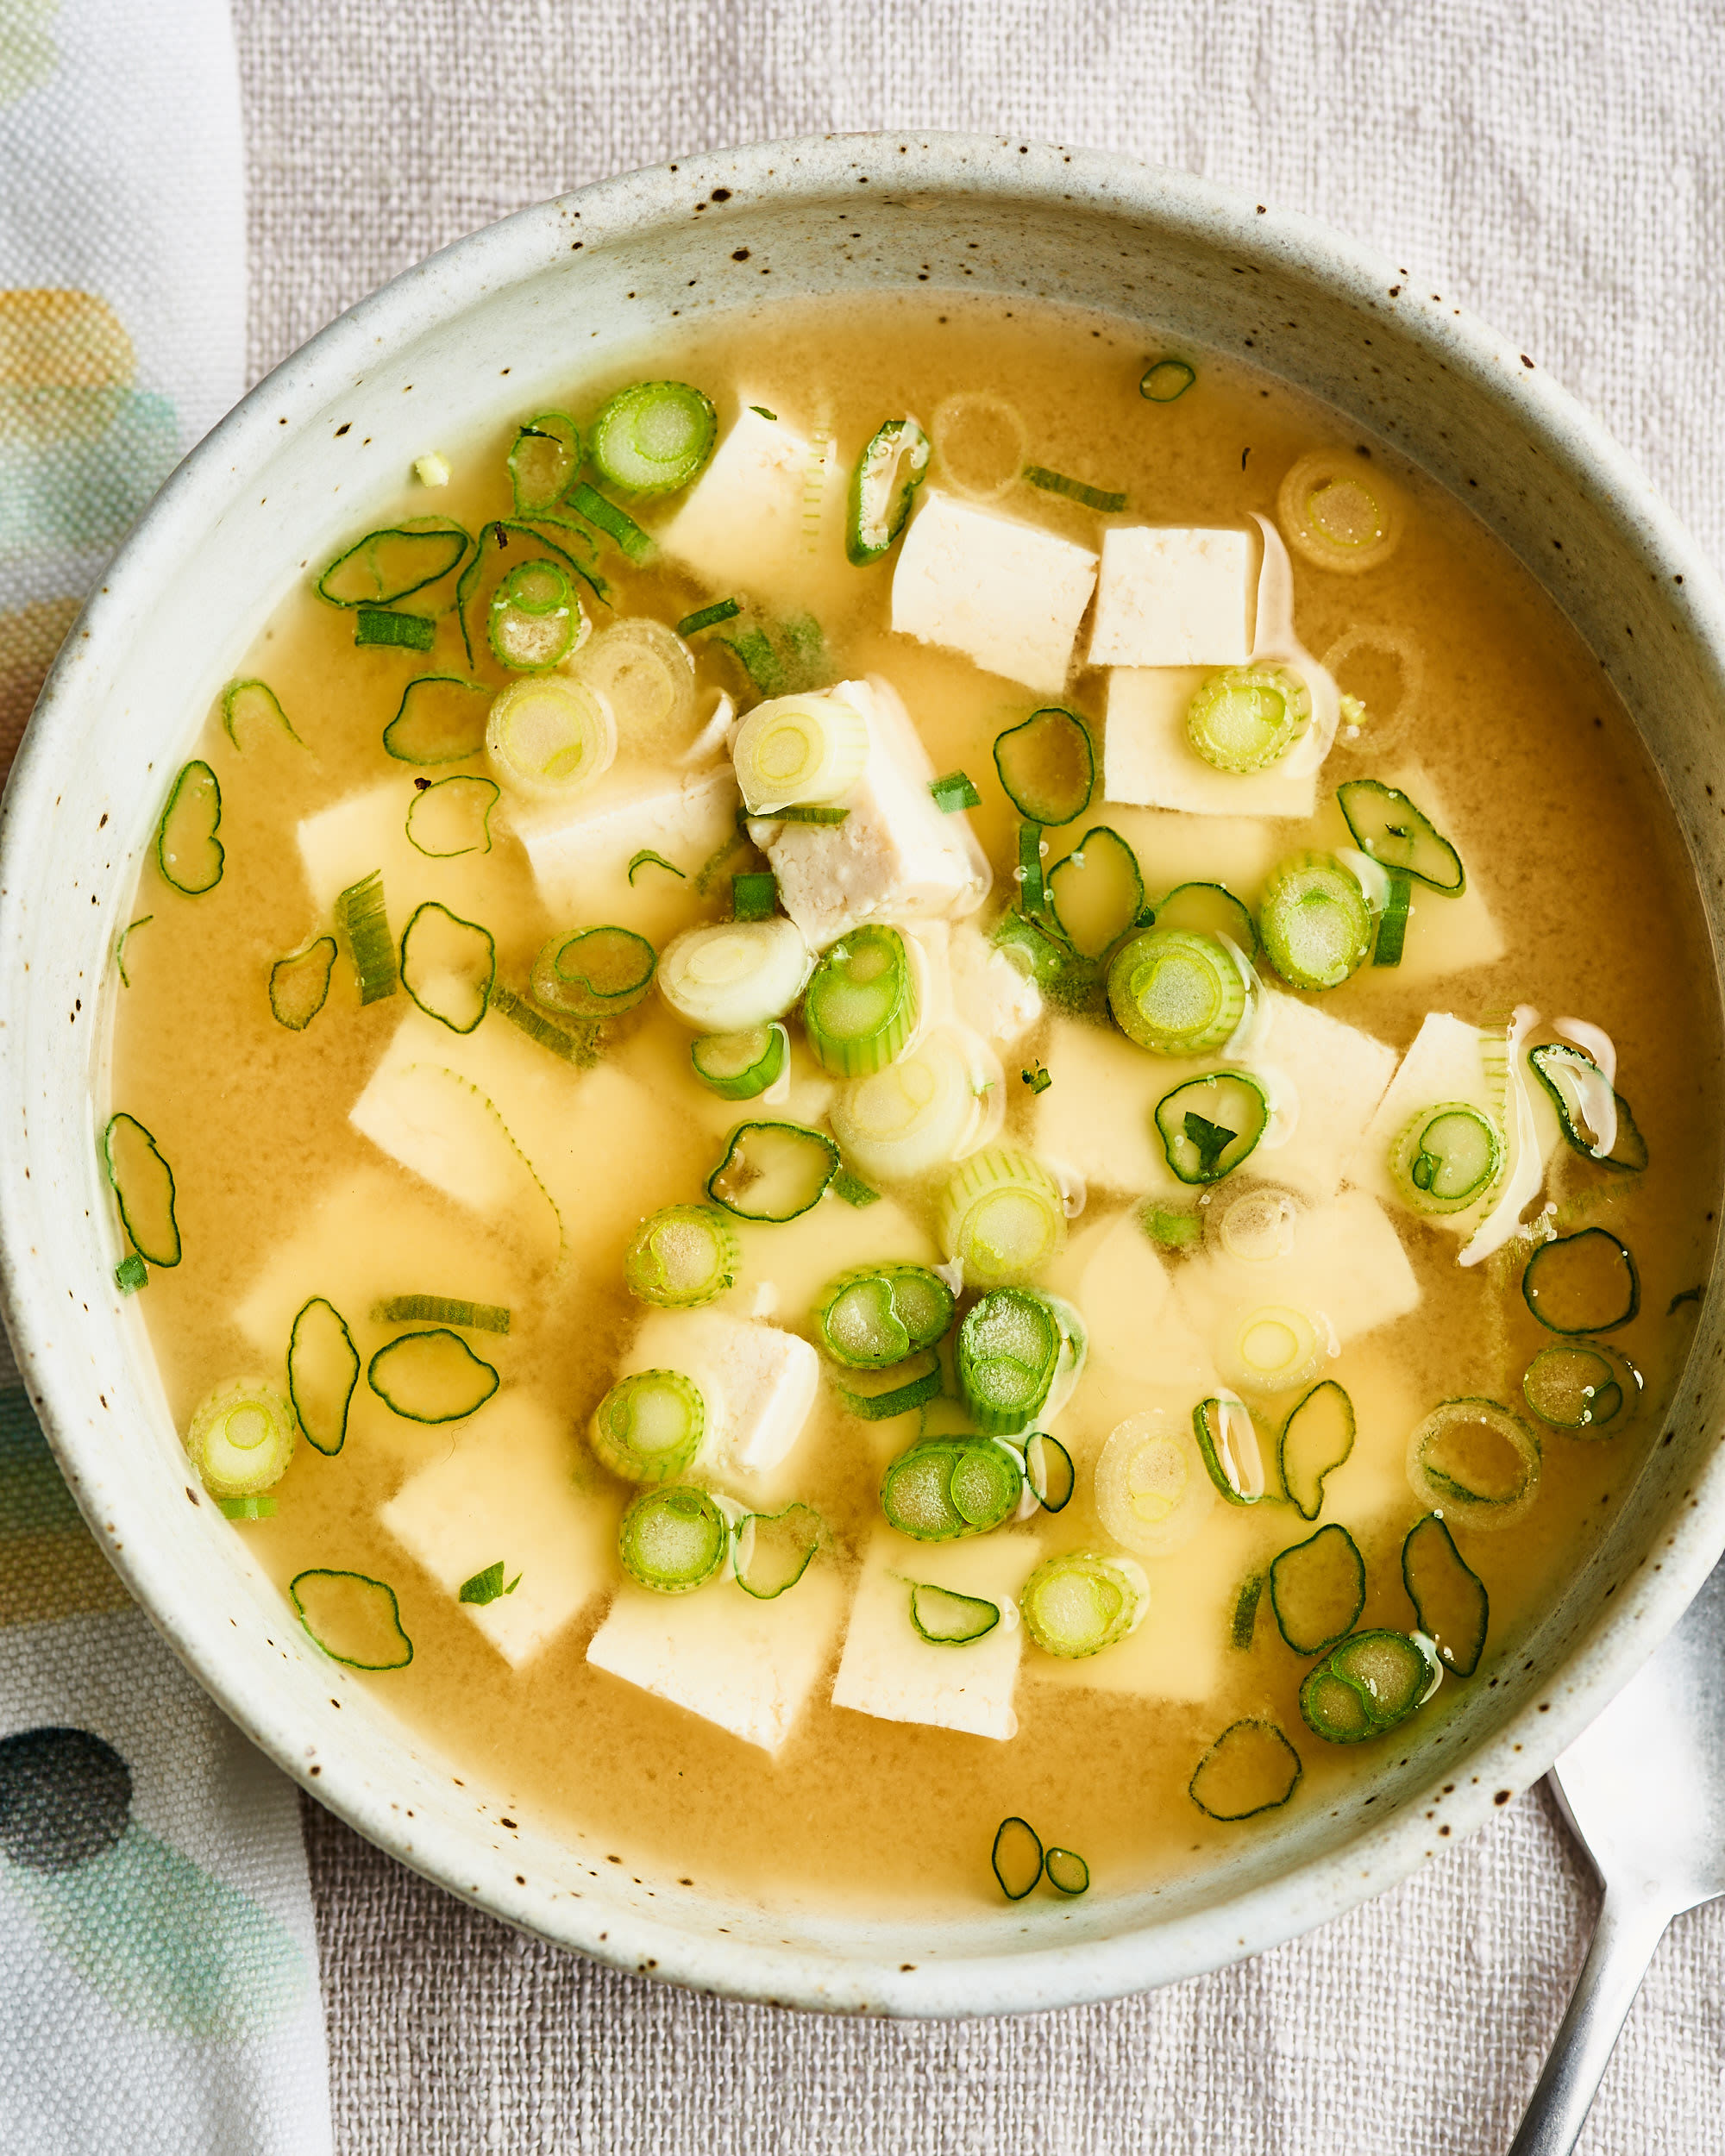 How To Make Easy Delicious Miso Soup At Home Kitchn,Temporary Countertop Covers